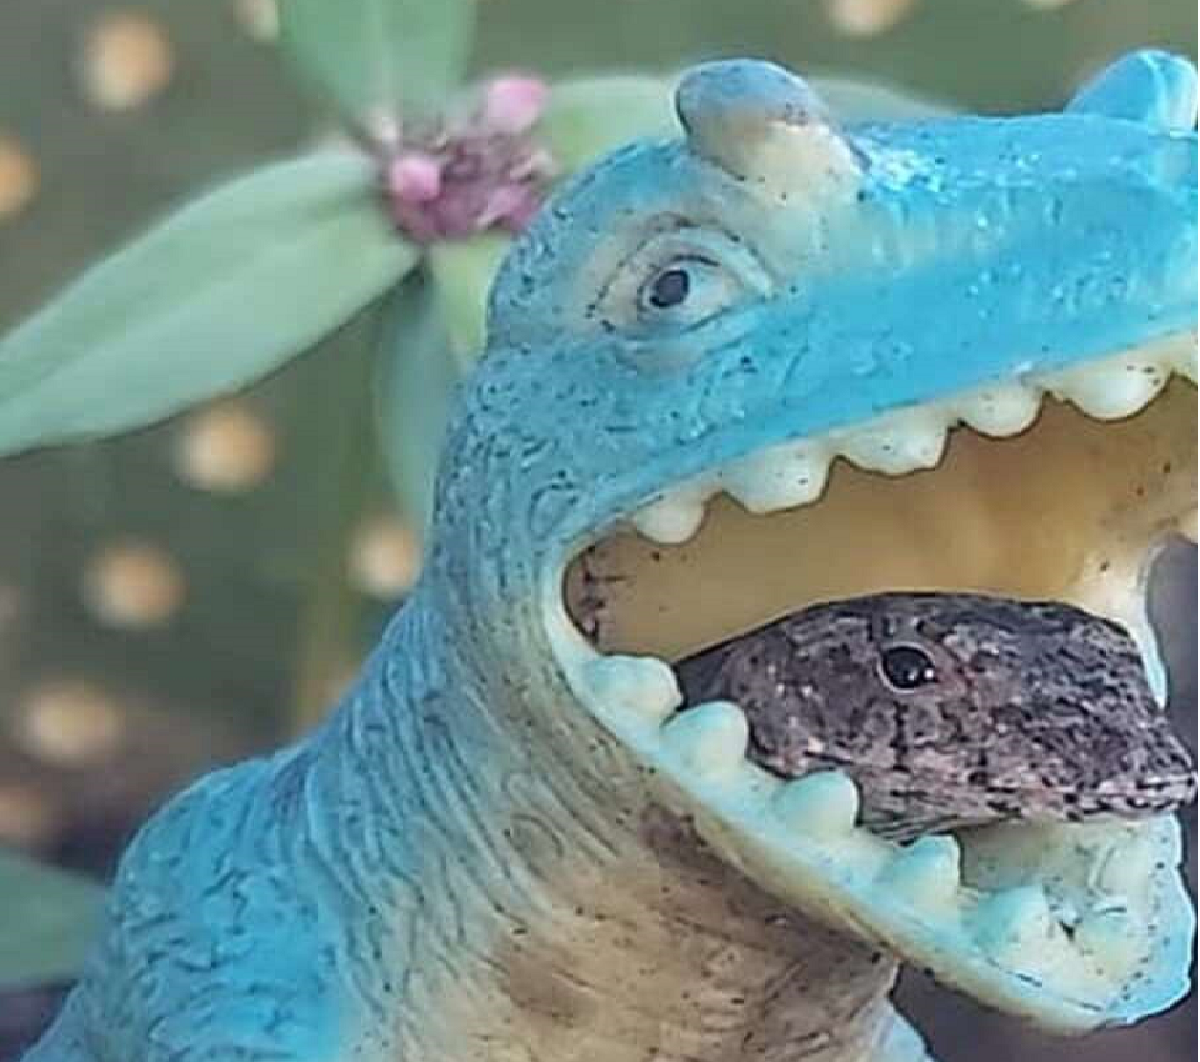 Little Lizard Finds The Perfect New Home Inside A Plastic Dinosaur